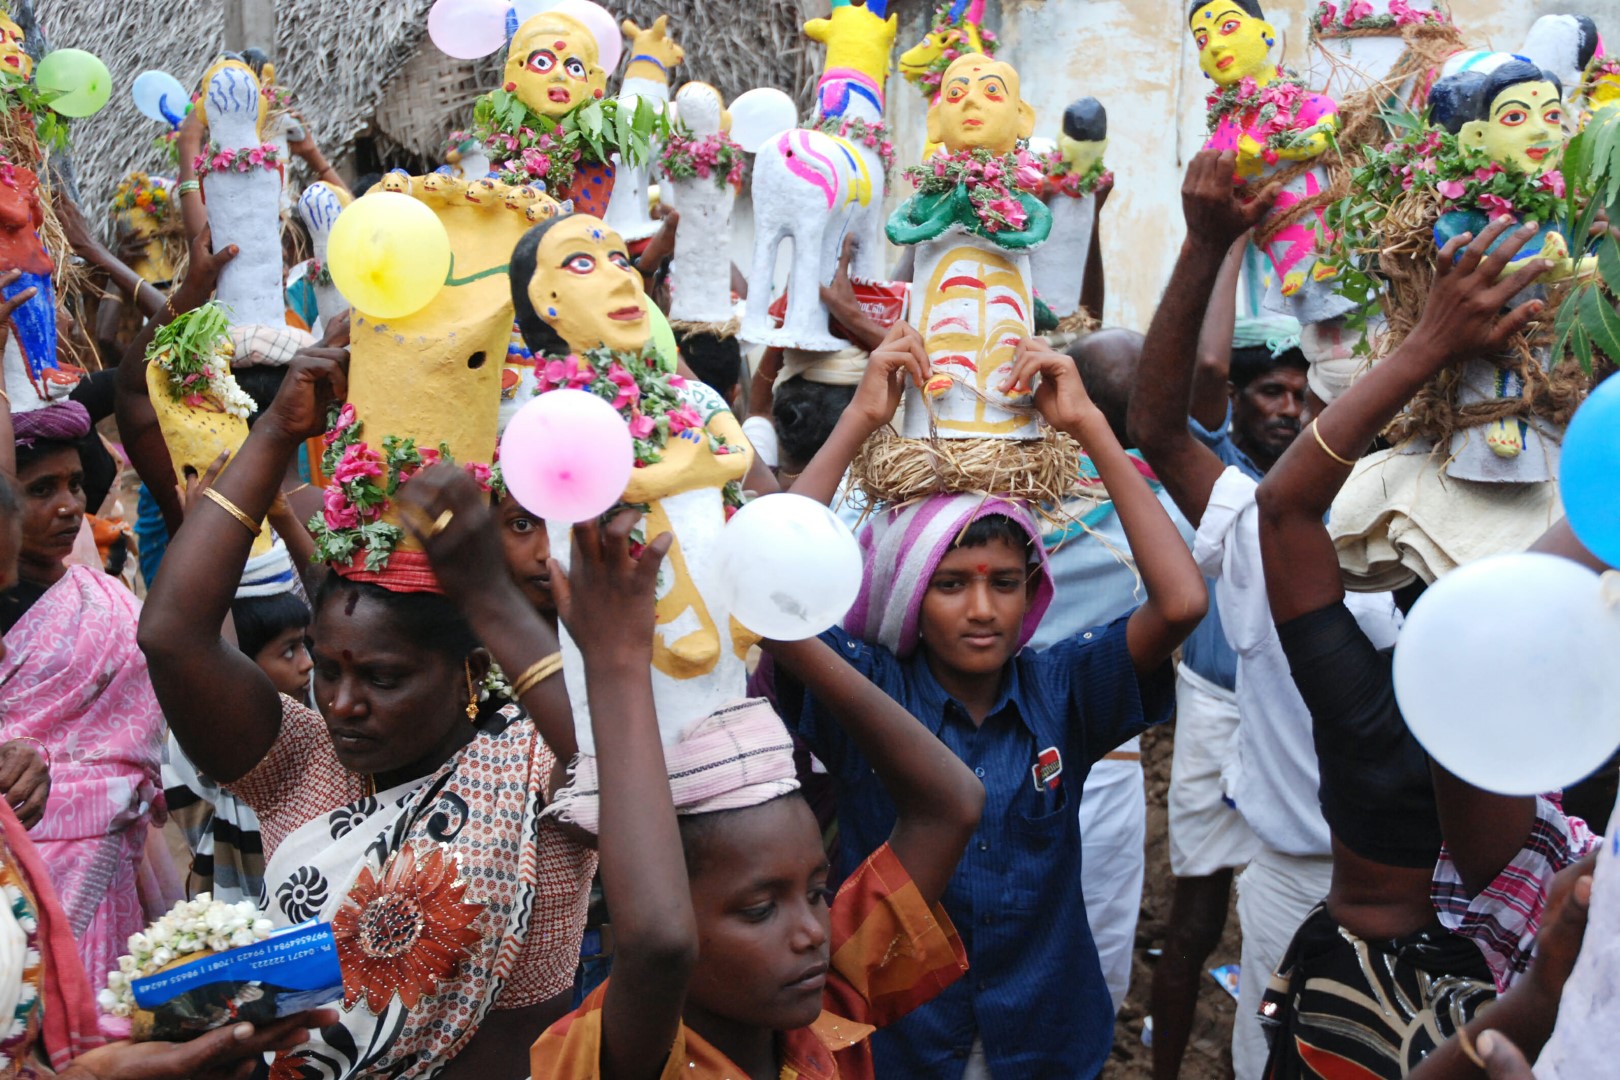 <span style="font-weight:normal;">After the first rituals that inaugerate the festival of worship to Ayyanar, women and youngsters hoist their decorated offerings onto their heads and ready themselves for the procession from the potters' quarters to the "intermediary grounds," 6 kilometres away.</span>